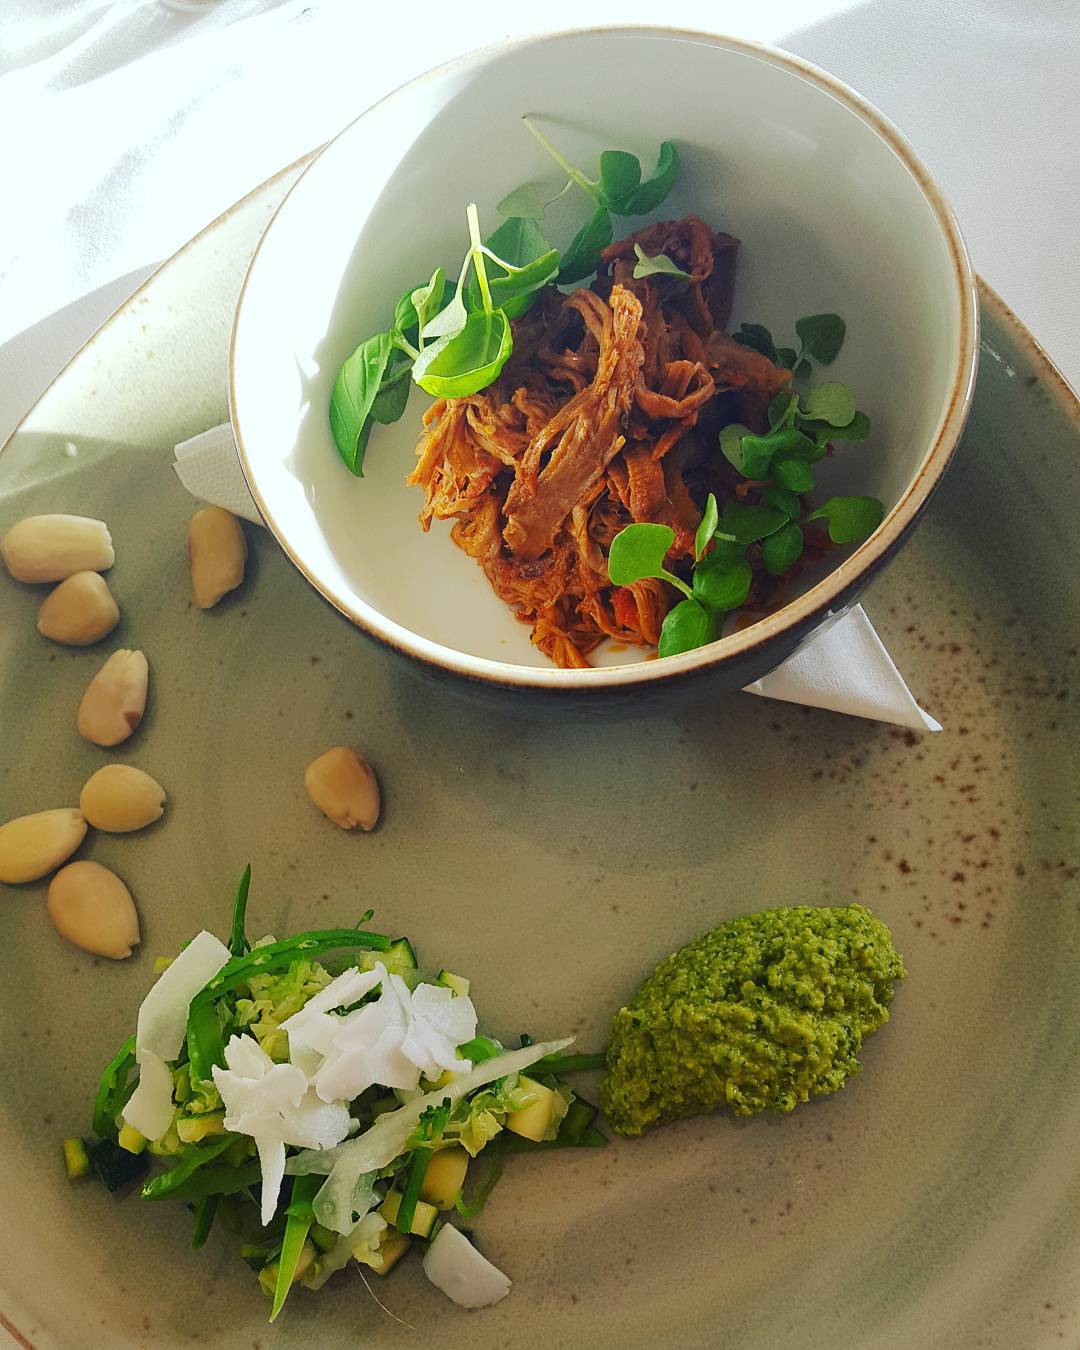 Lunchtime

Pulled pork shoulder(with Moroccan style spices) with green pea dip, blanched vegetables and soaked nuts (blanching and soaking makes them  less indigestable than raw). A side of mixed vegetables too.

@grayshottspa